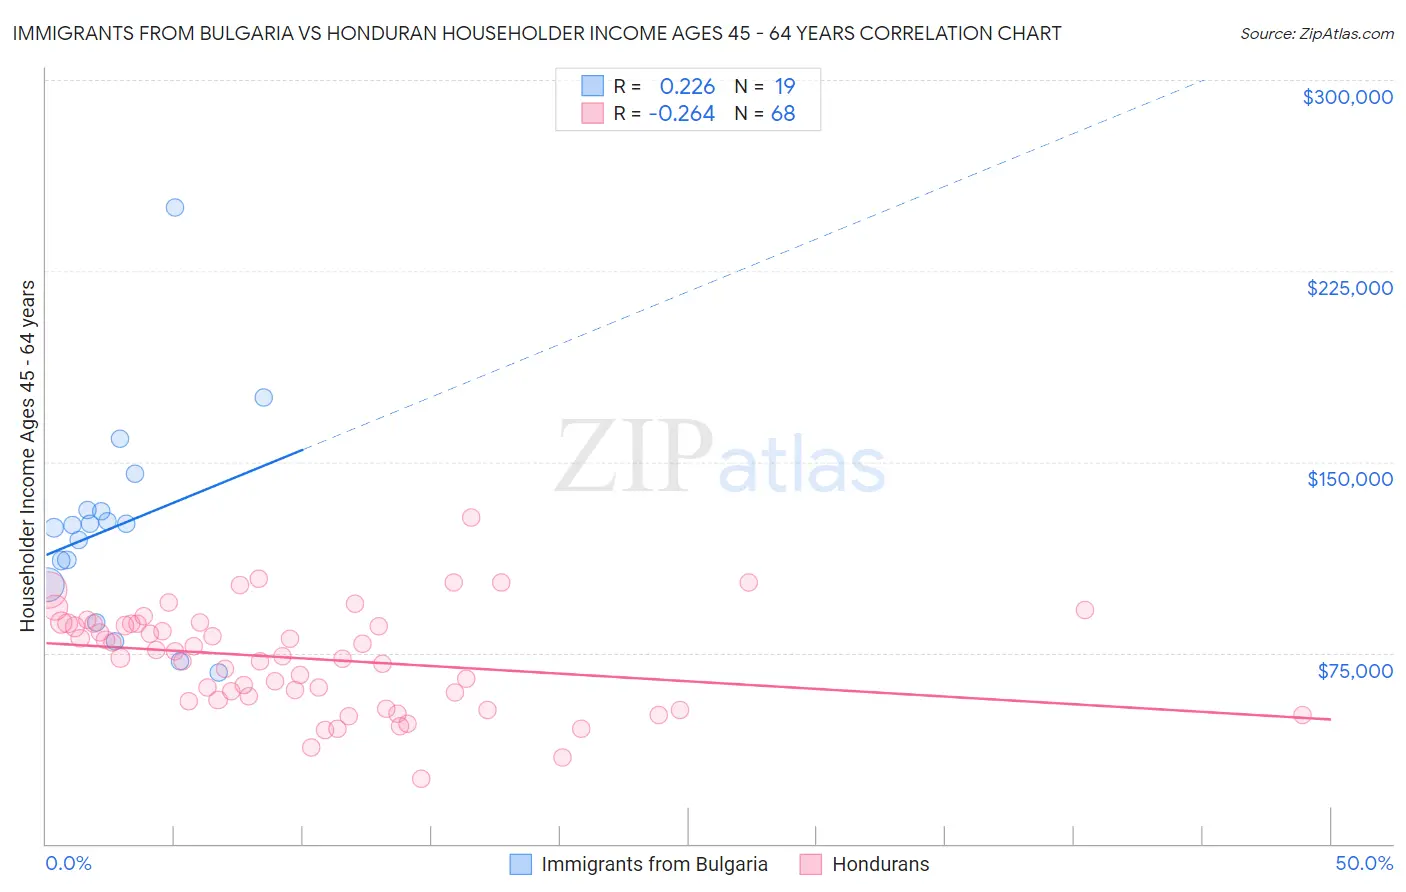 Immigrants from Bulgaria vs Honduran Householder Income Ages 45 - 64 years